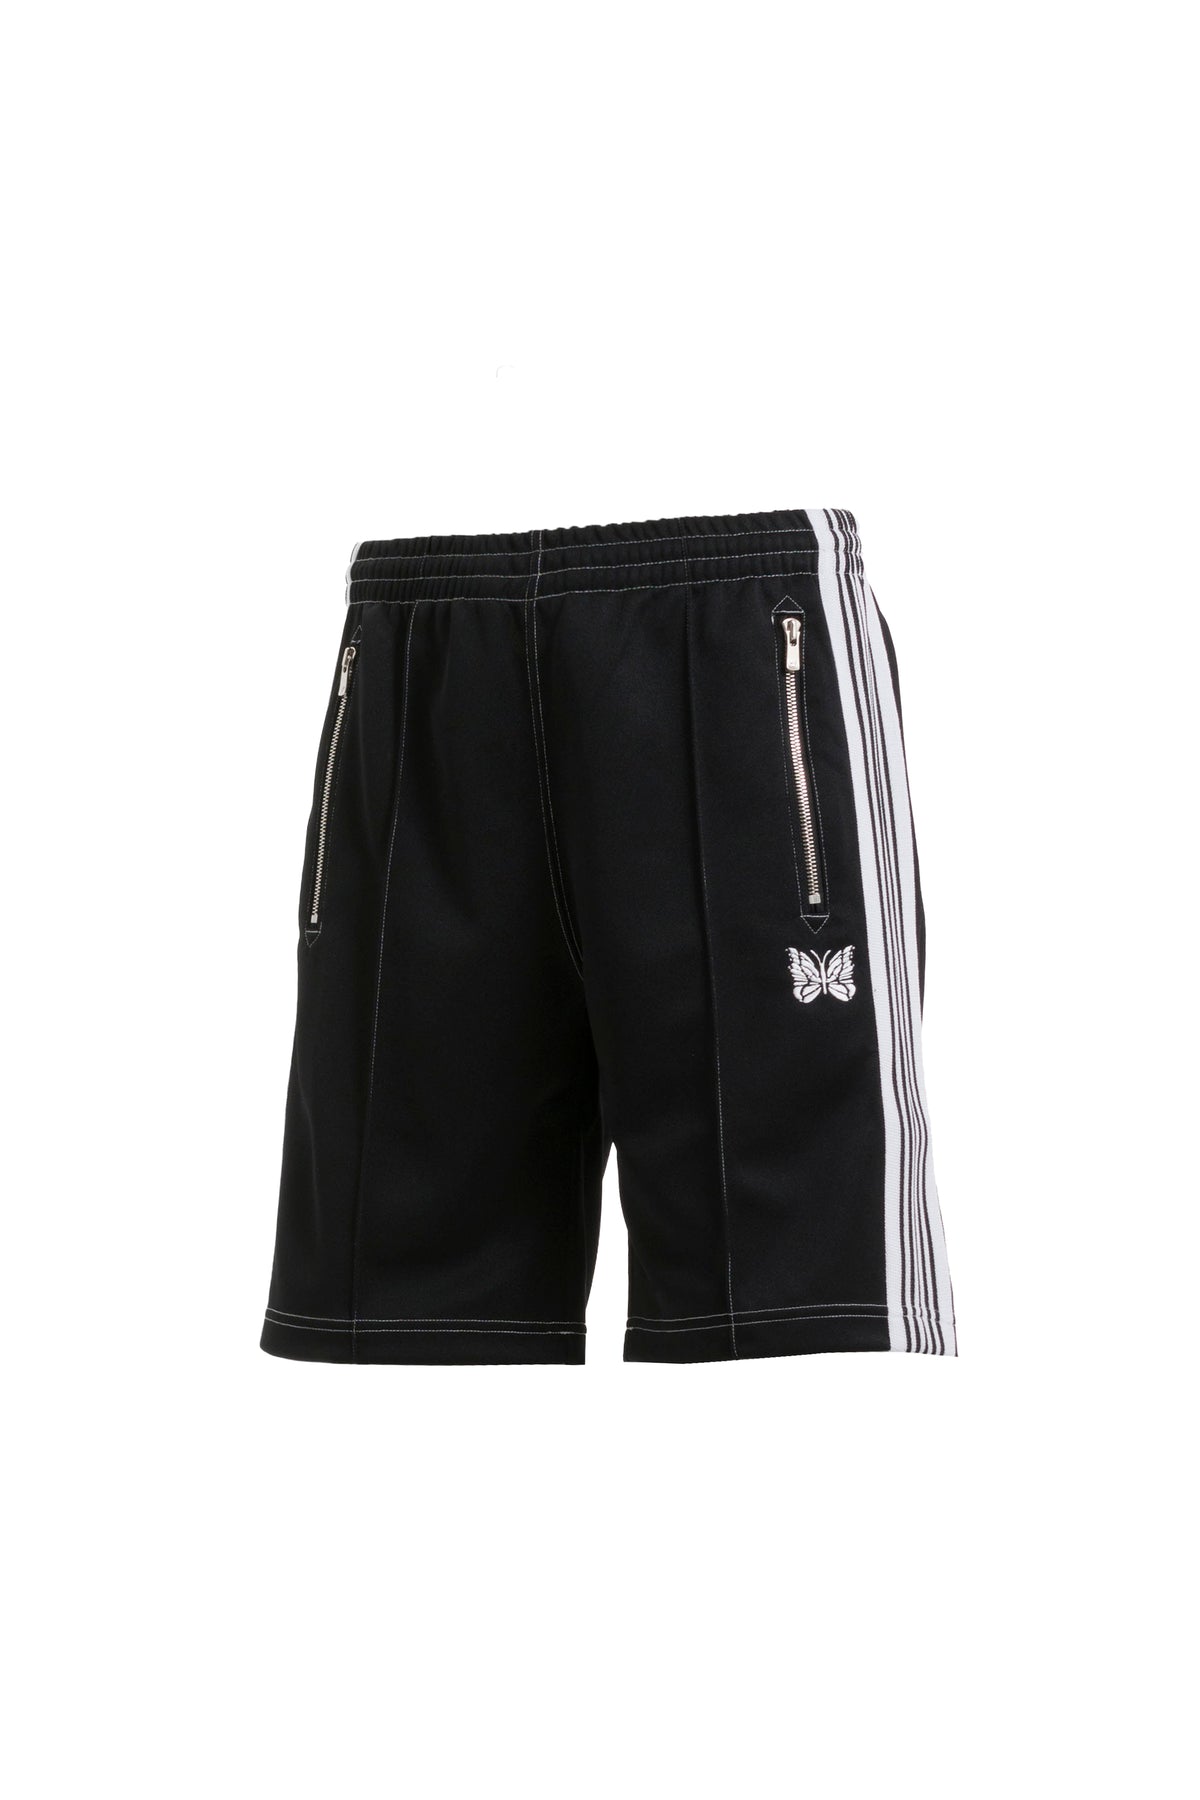 TRACK SHORTS - POLY SMOOTH(EXCLUSIVE) / BLK WHT